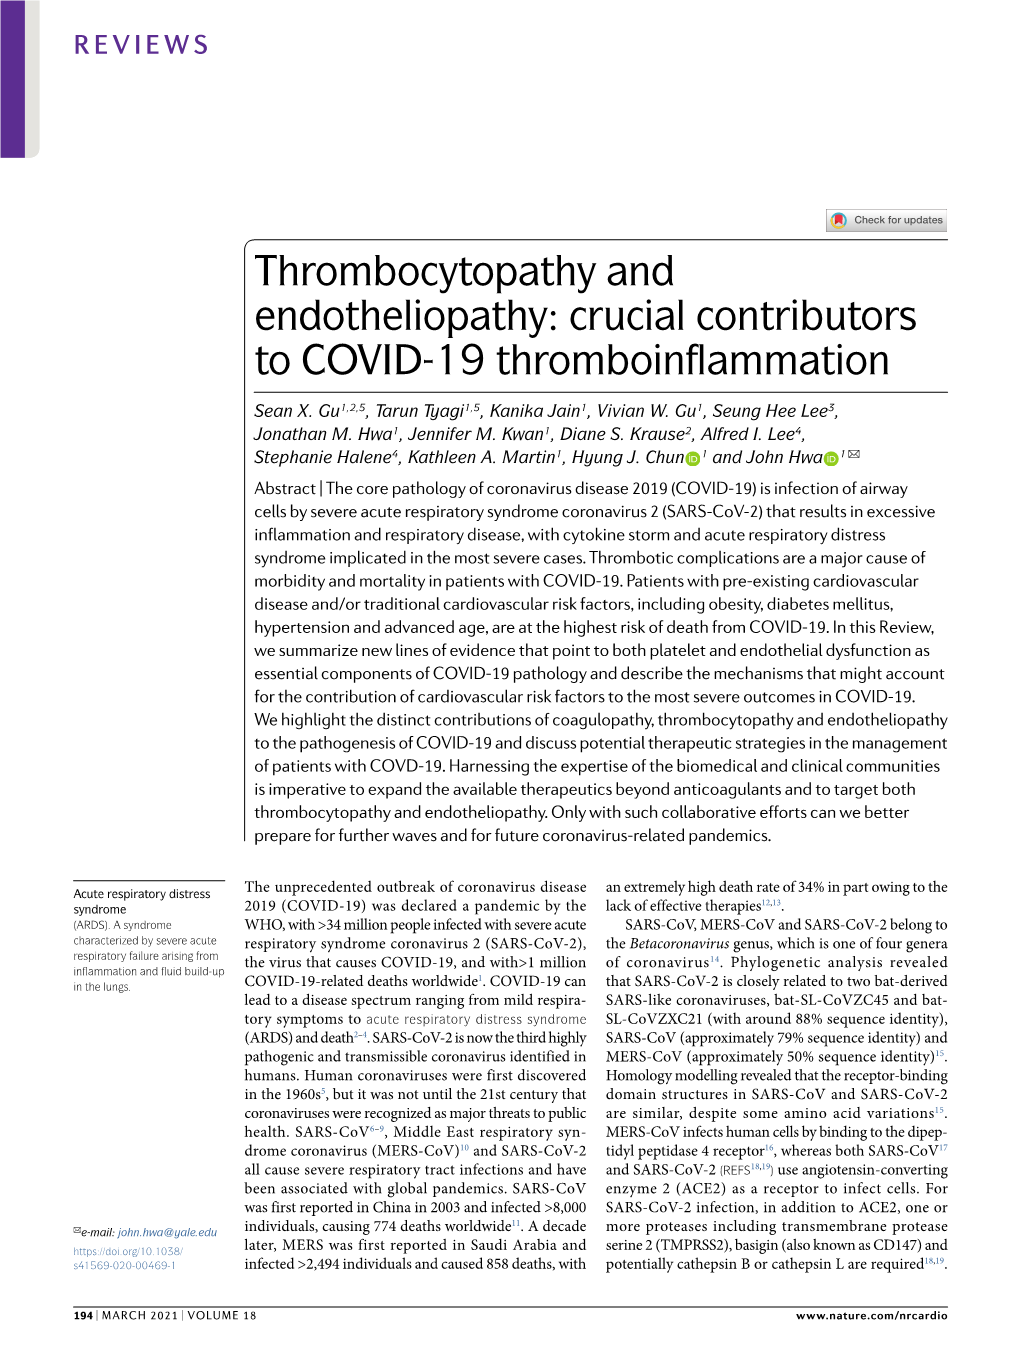 Crucial Contributors to COVID-19 Thromboinflammation